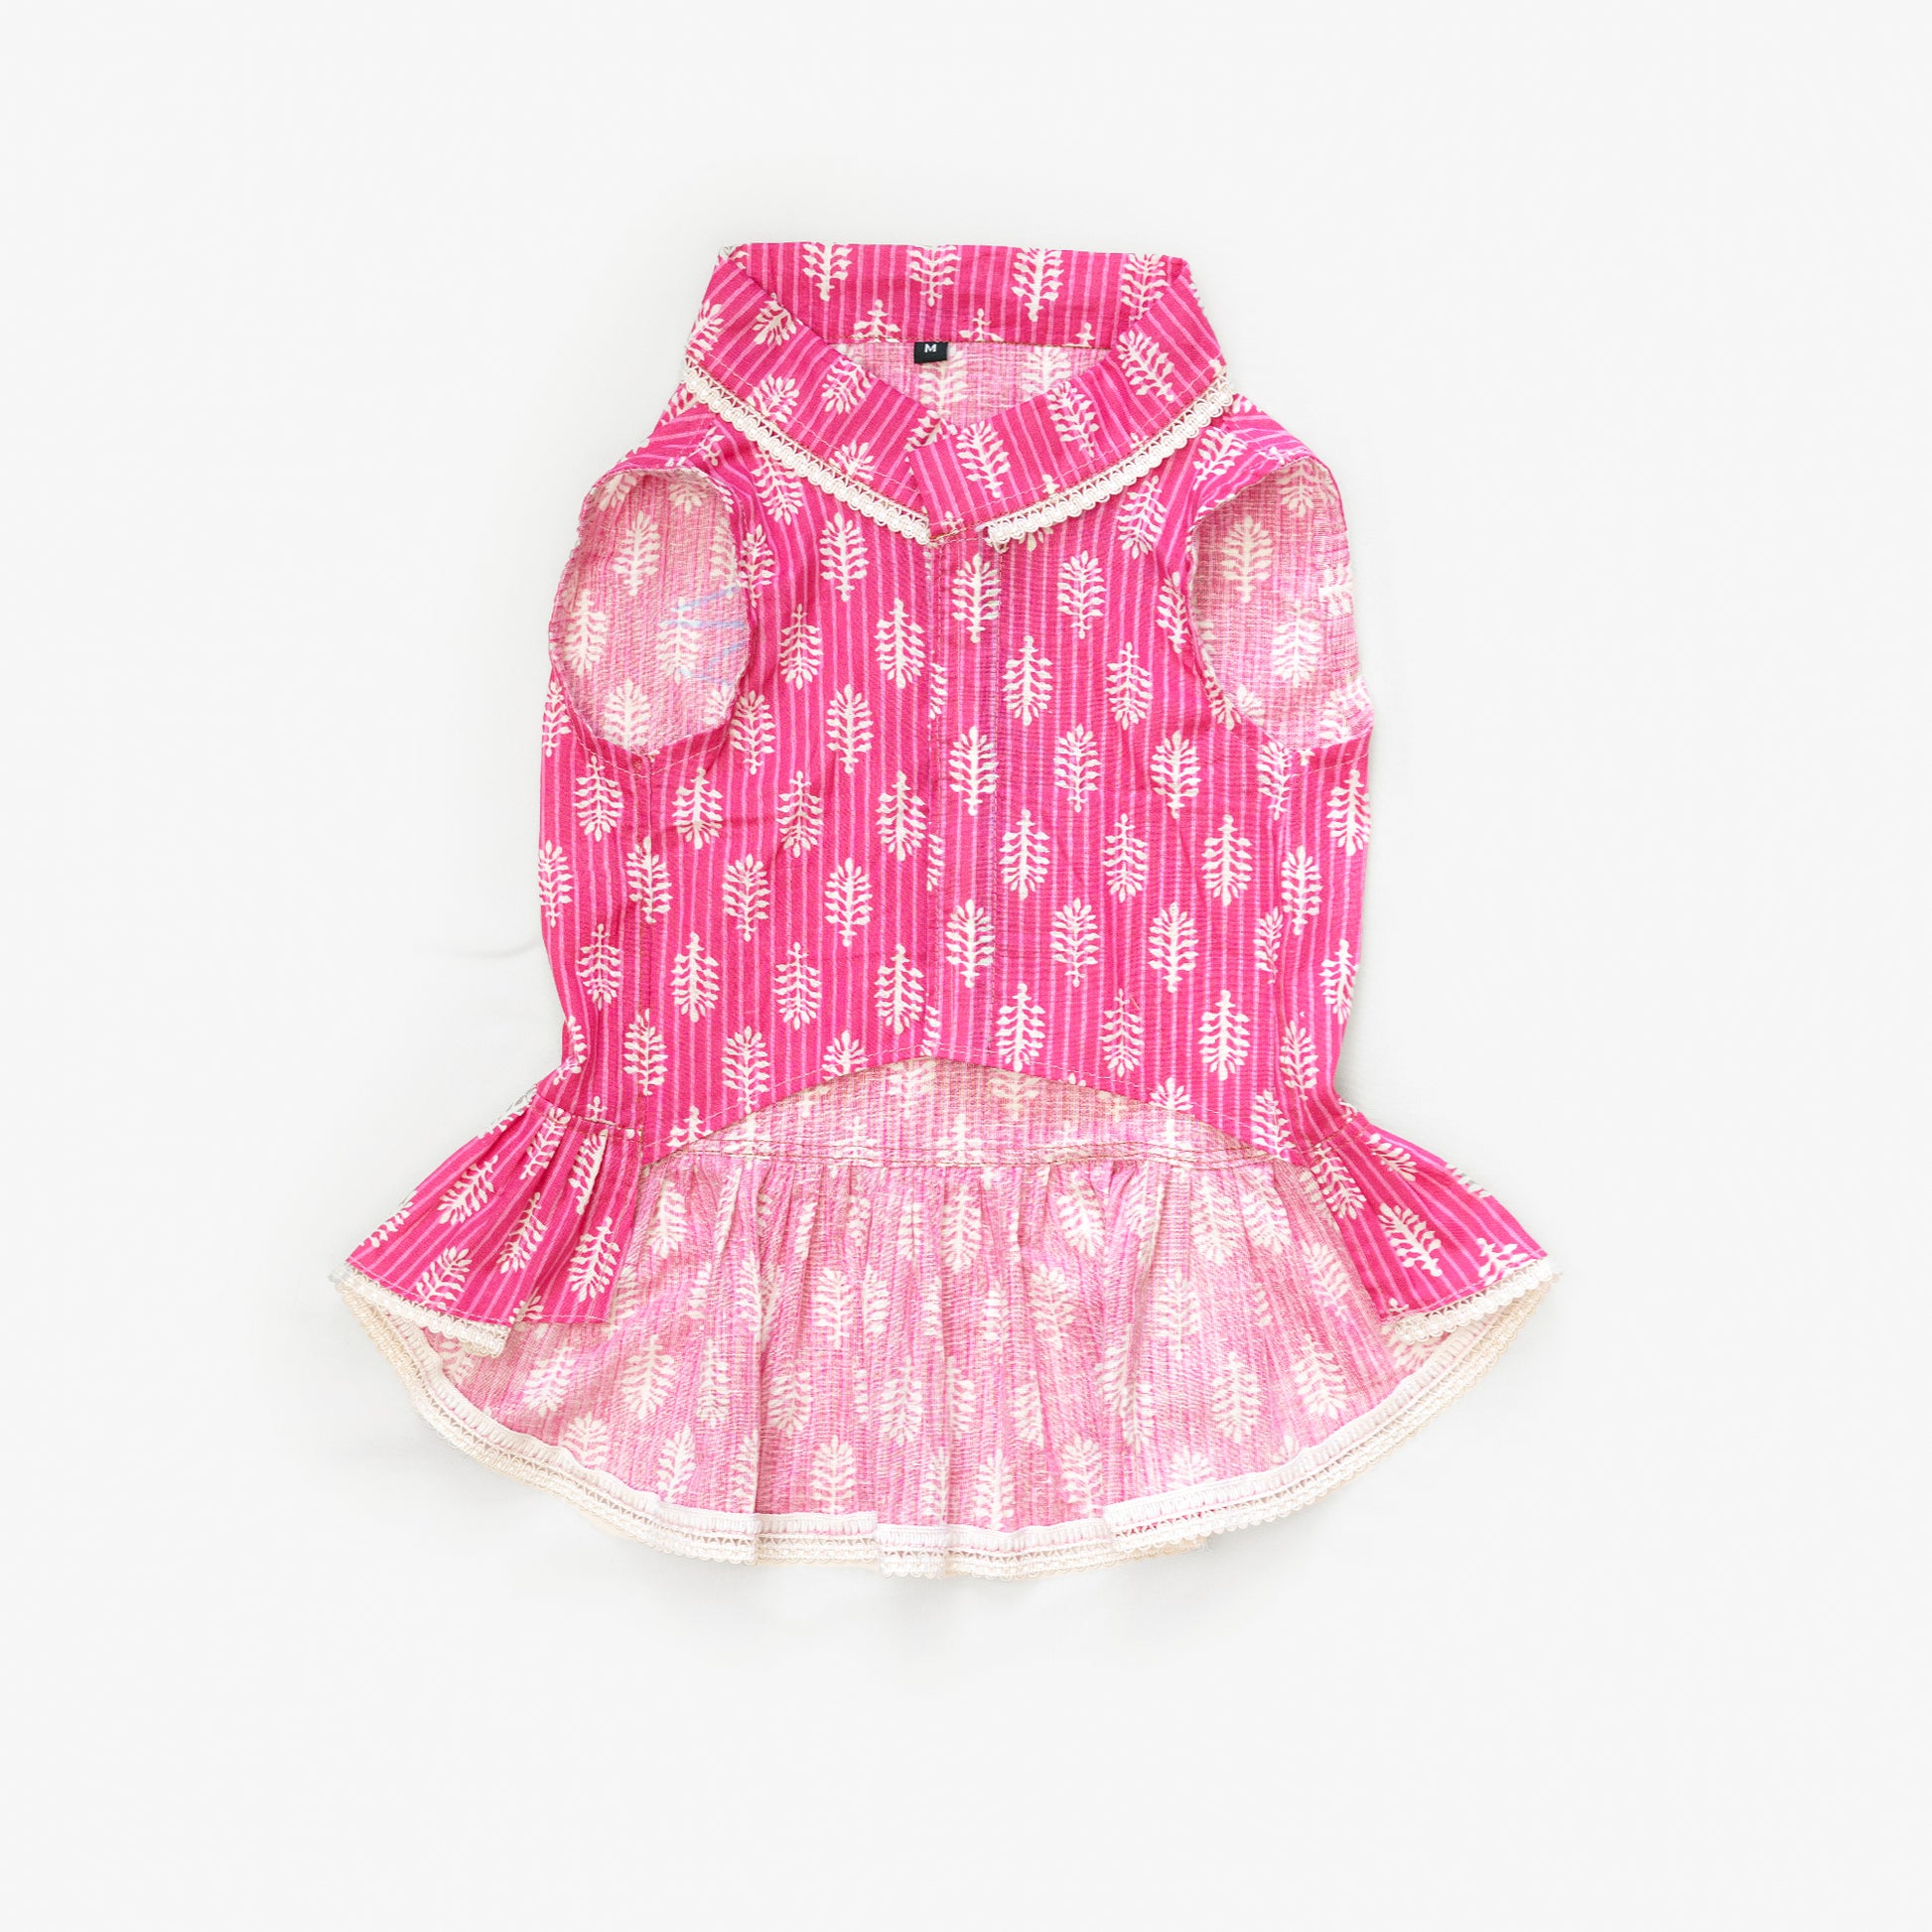 Pawgy Pets Heritage Handblock Dress Pink for Dogs